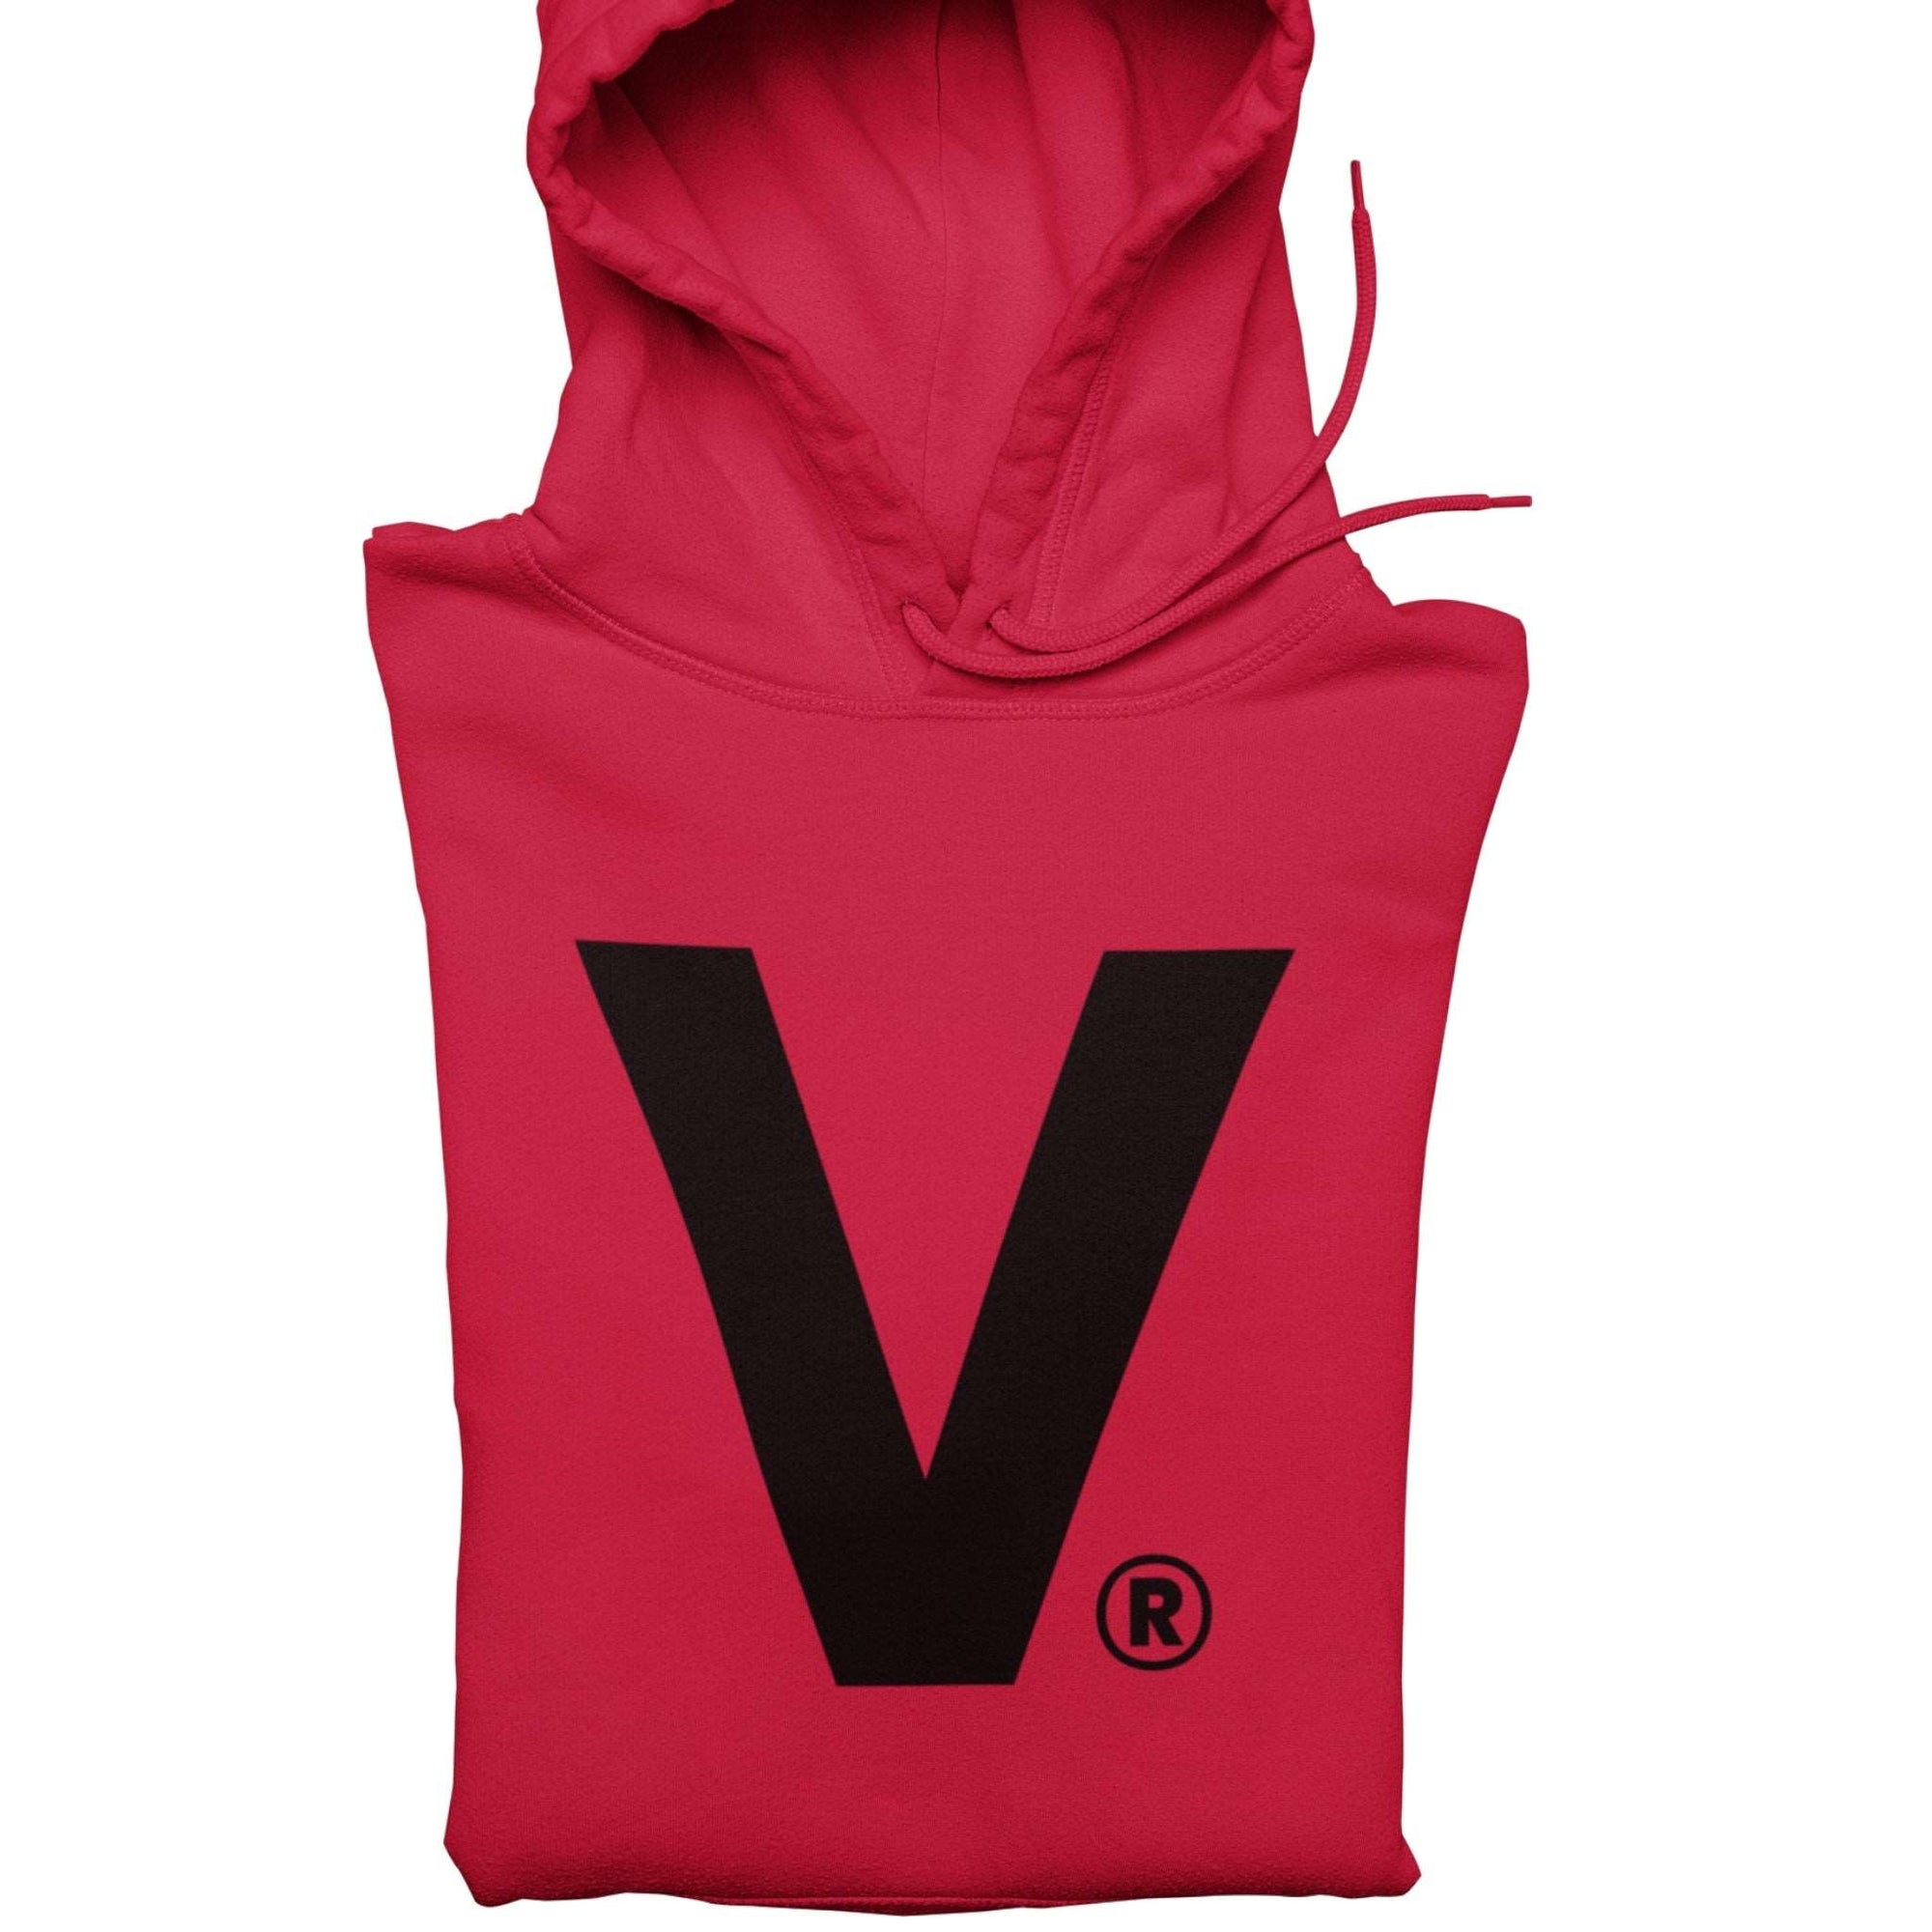 Varcity ® Iconic V Logo Pullover Hoodie Cardinal Red